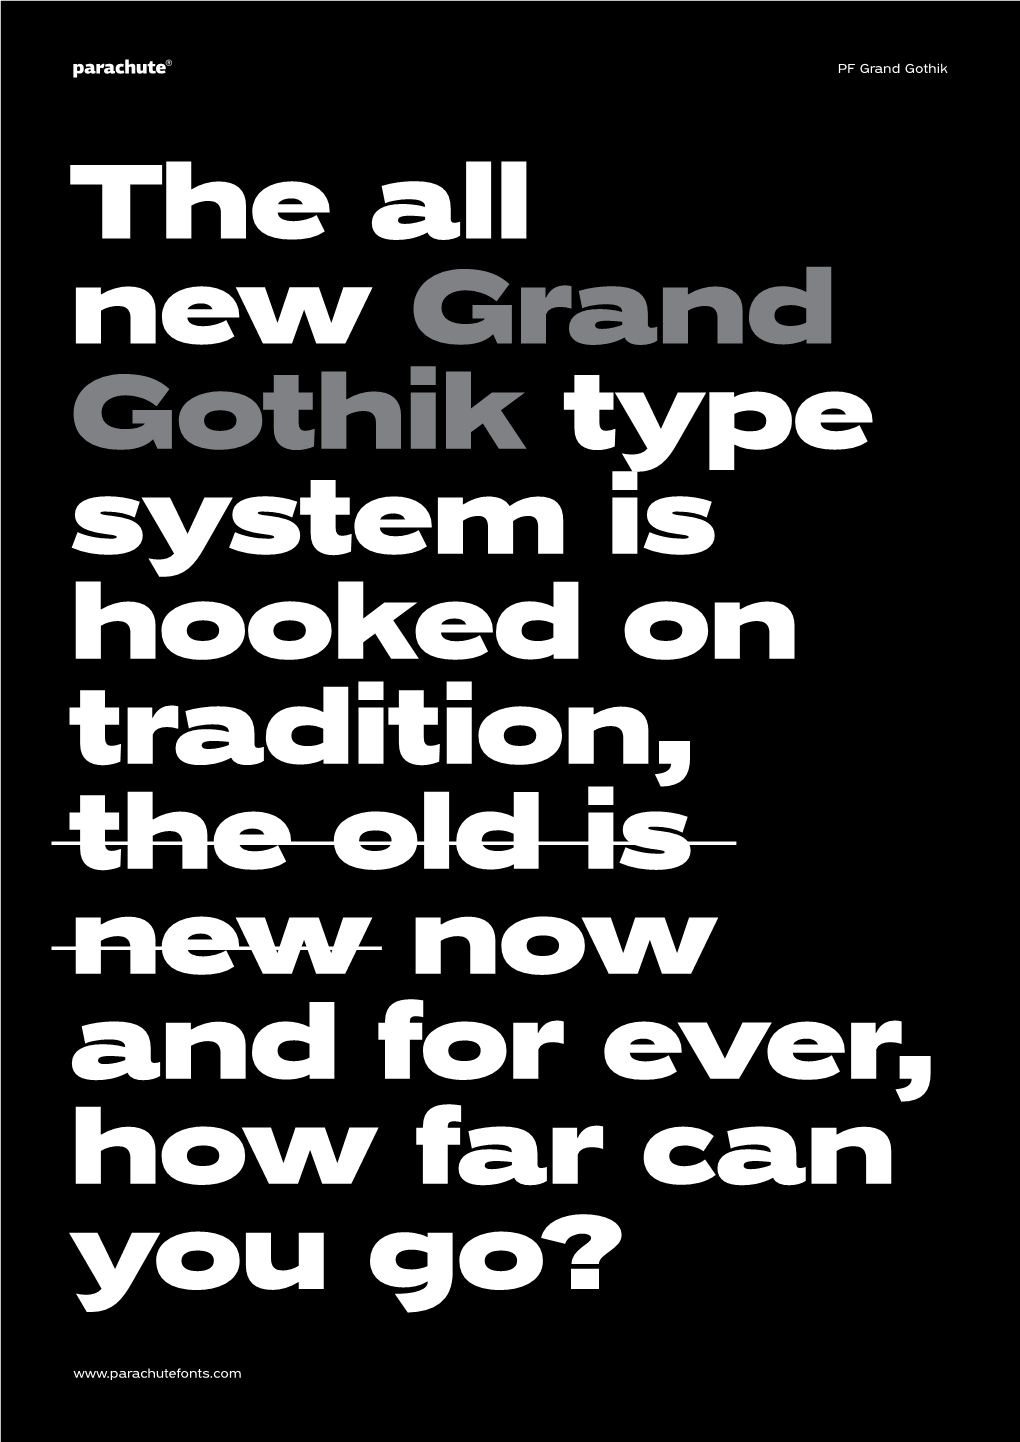 The All New Grand Gothik Type System Is Hooked on Tradition, the Old Is New Now and for Ever, How Far Can You Go?